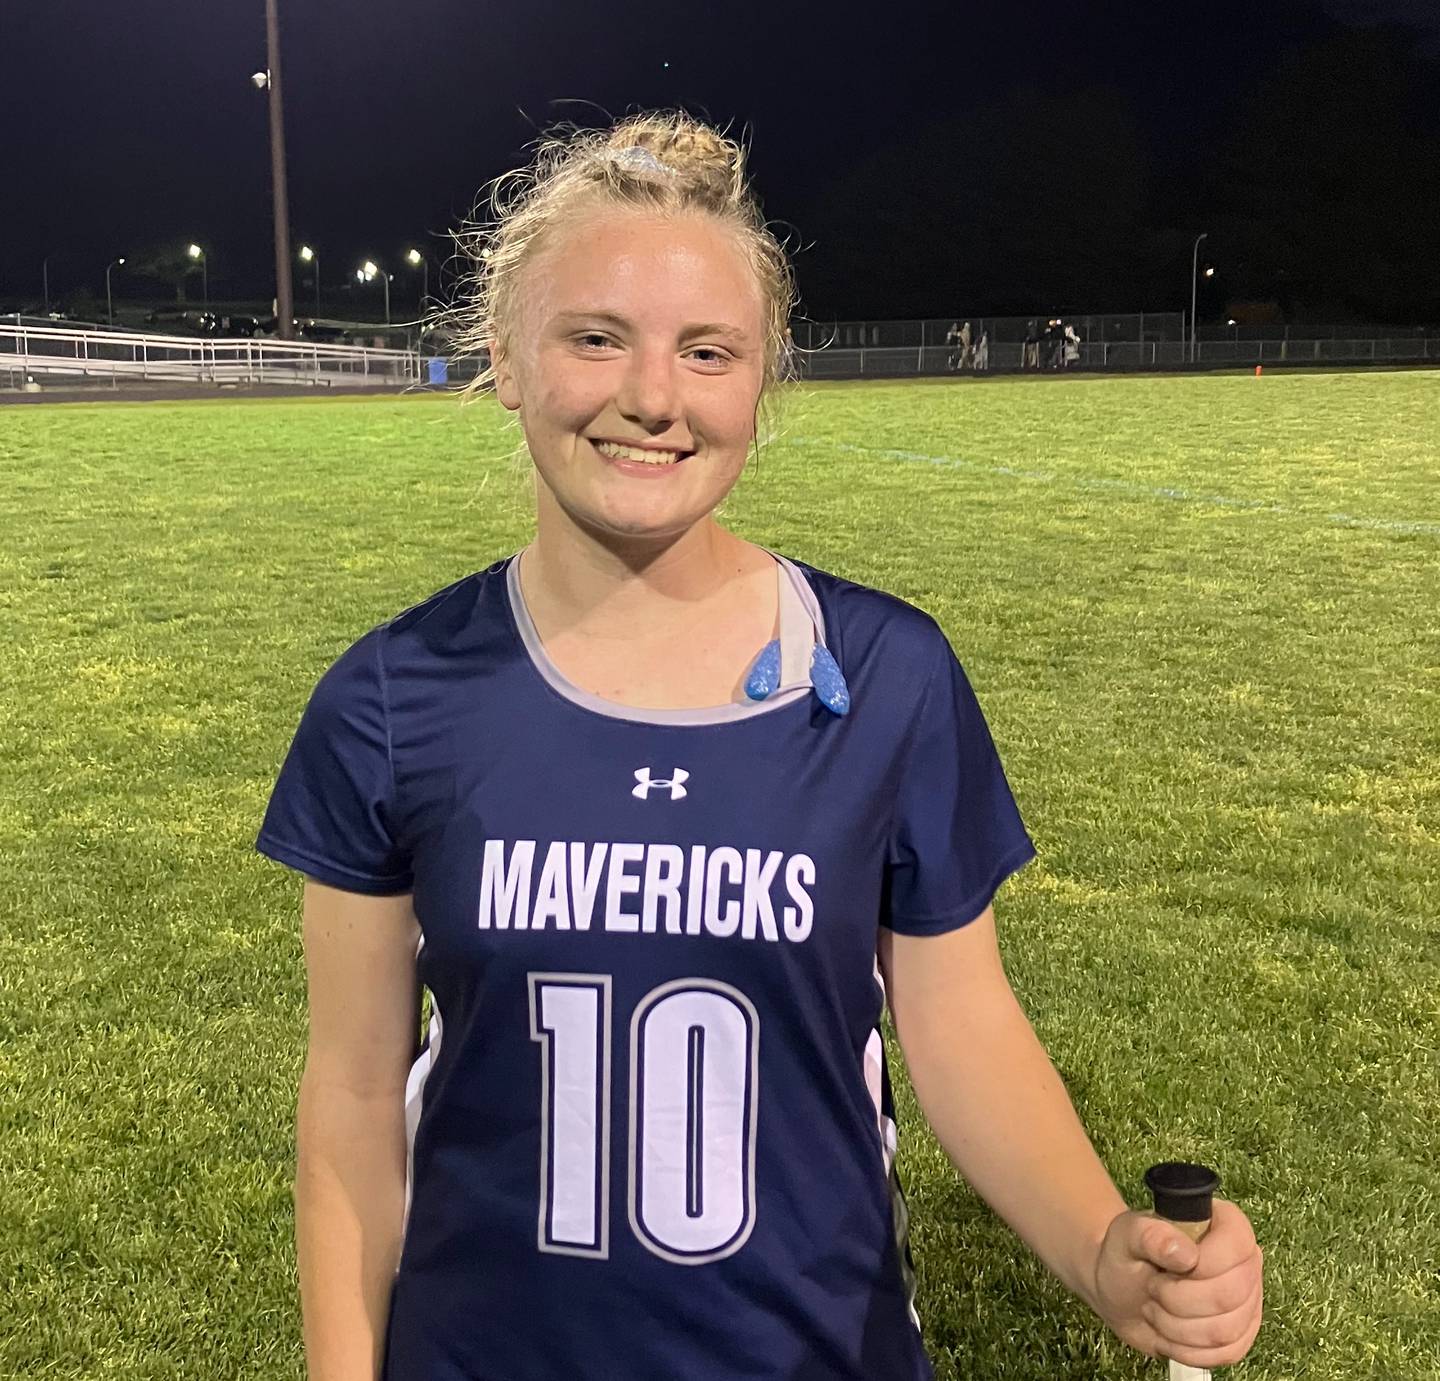 Emma Penczek helped Manchester Valley's girls lacrosse team clinched the Carroll County Athletic League title Wednesday evening. The sophomore midfielder finished with seven goals and two assists as the undefeated and No. 6 Mavericks defeated Westminster, 17-4.